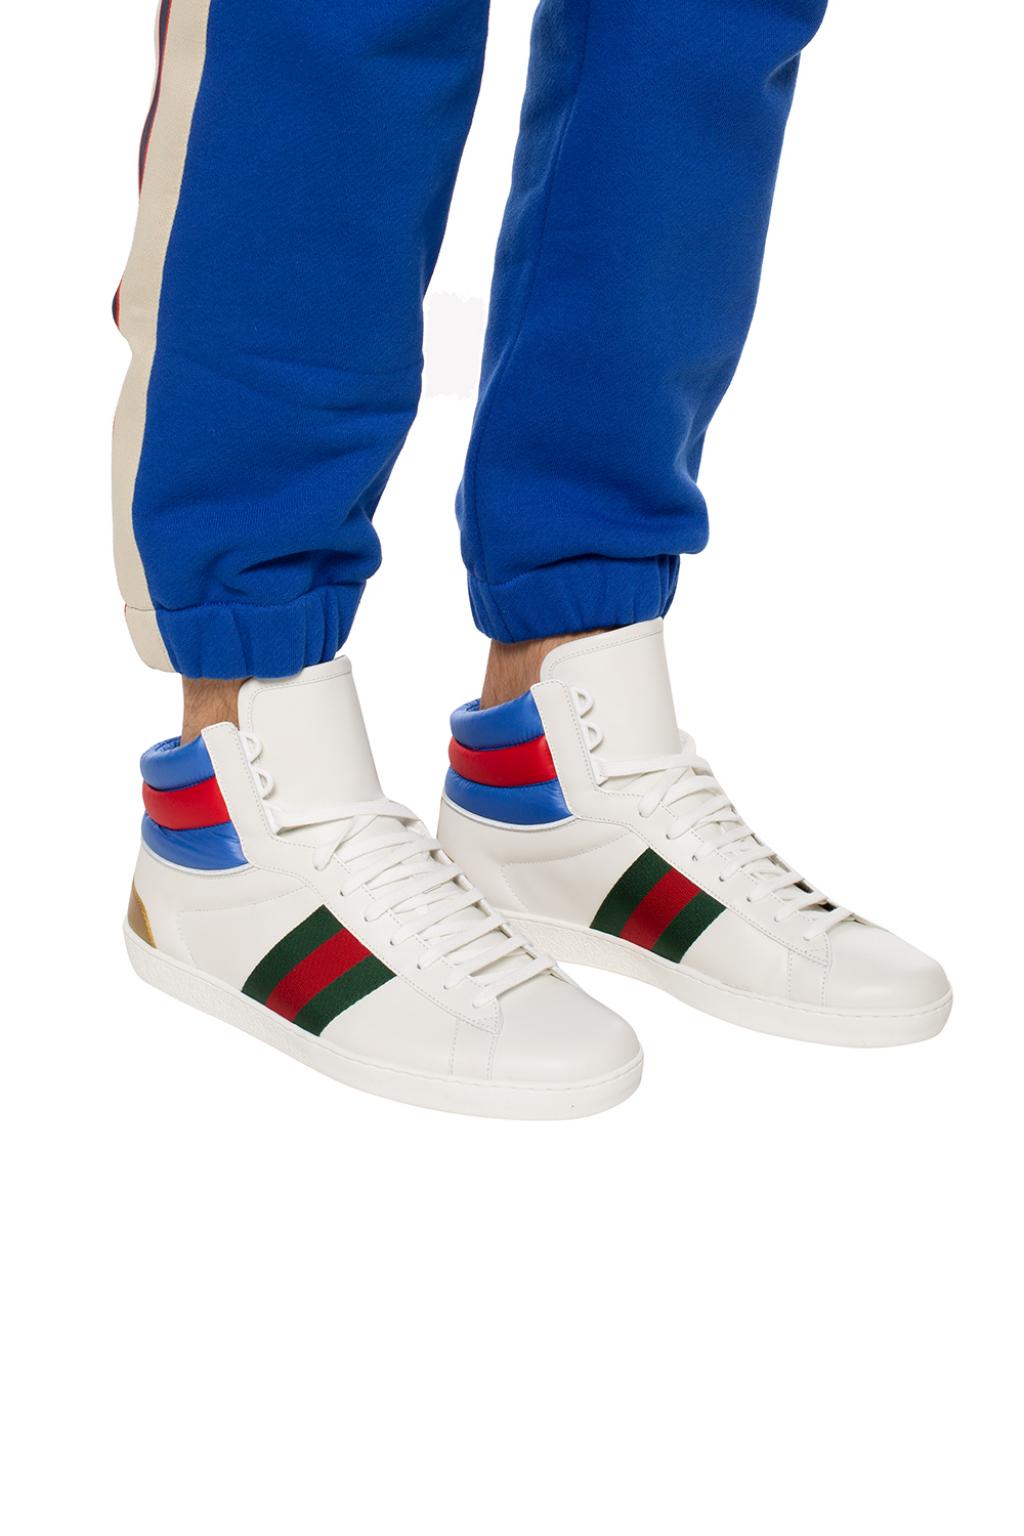 gucci ace high top sneakers